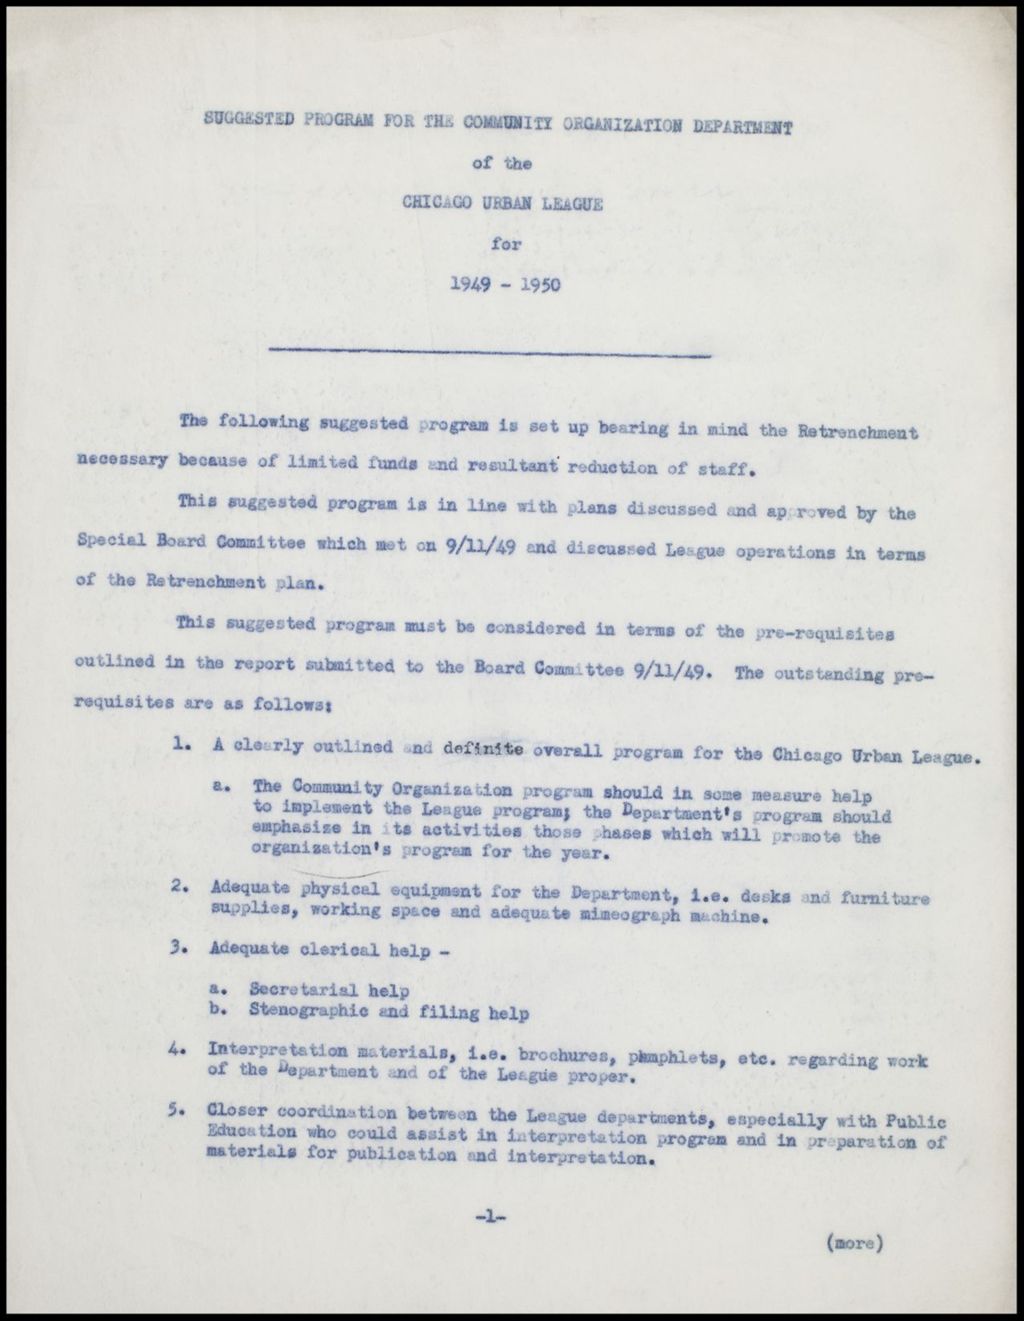 Miniature of Proposed Programs and Highlights of Post Programs, 1949-1954 (Folder II-2177)